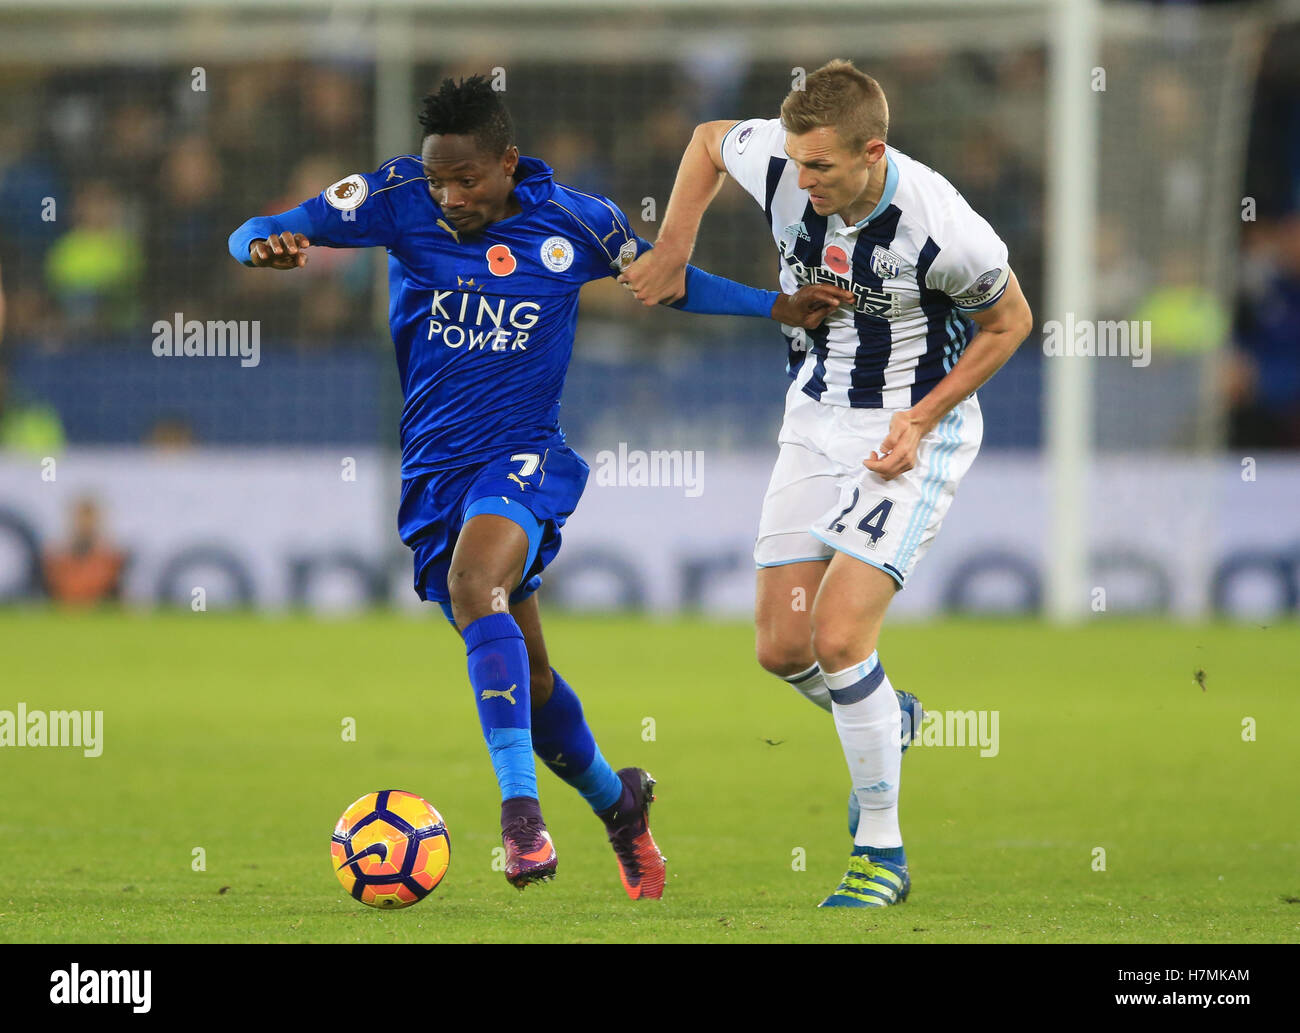 Leicester City's Ahmed Musa (left) battles for the ball with West Bromwich Albion's Darren Fletcher (right) during the Premier League match at the King Power Stadium, Leicester. Stock Photo